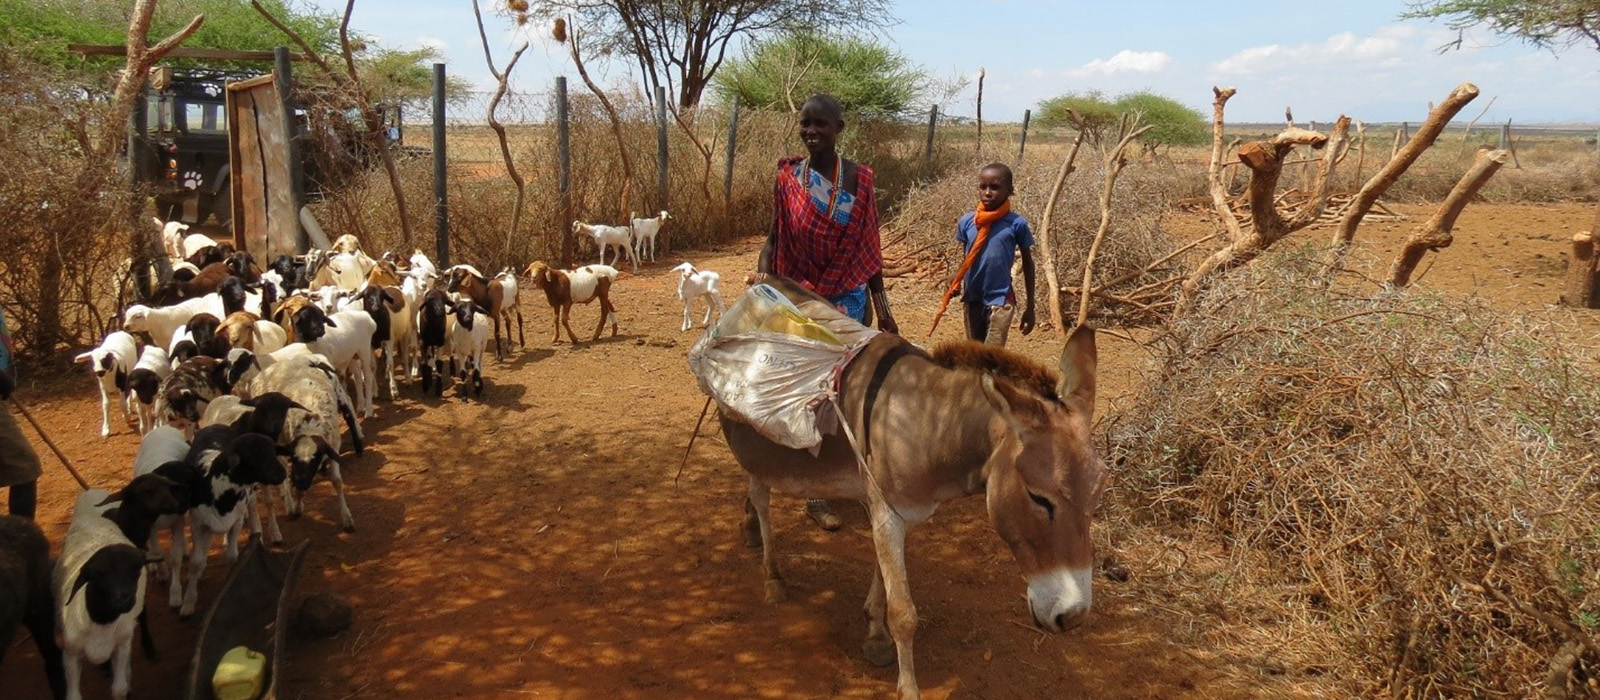 A photo showing Massai villagers herding cattle into a predator proof boma with a Born Free Land Rover in the background